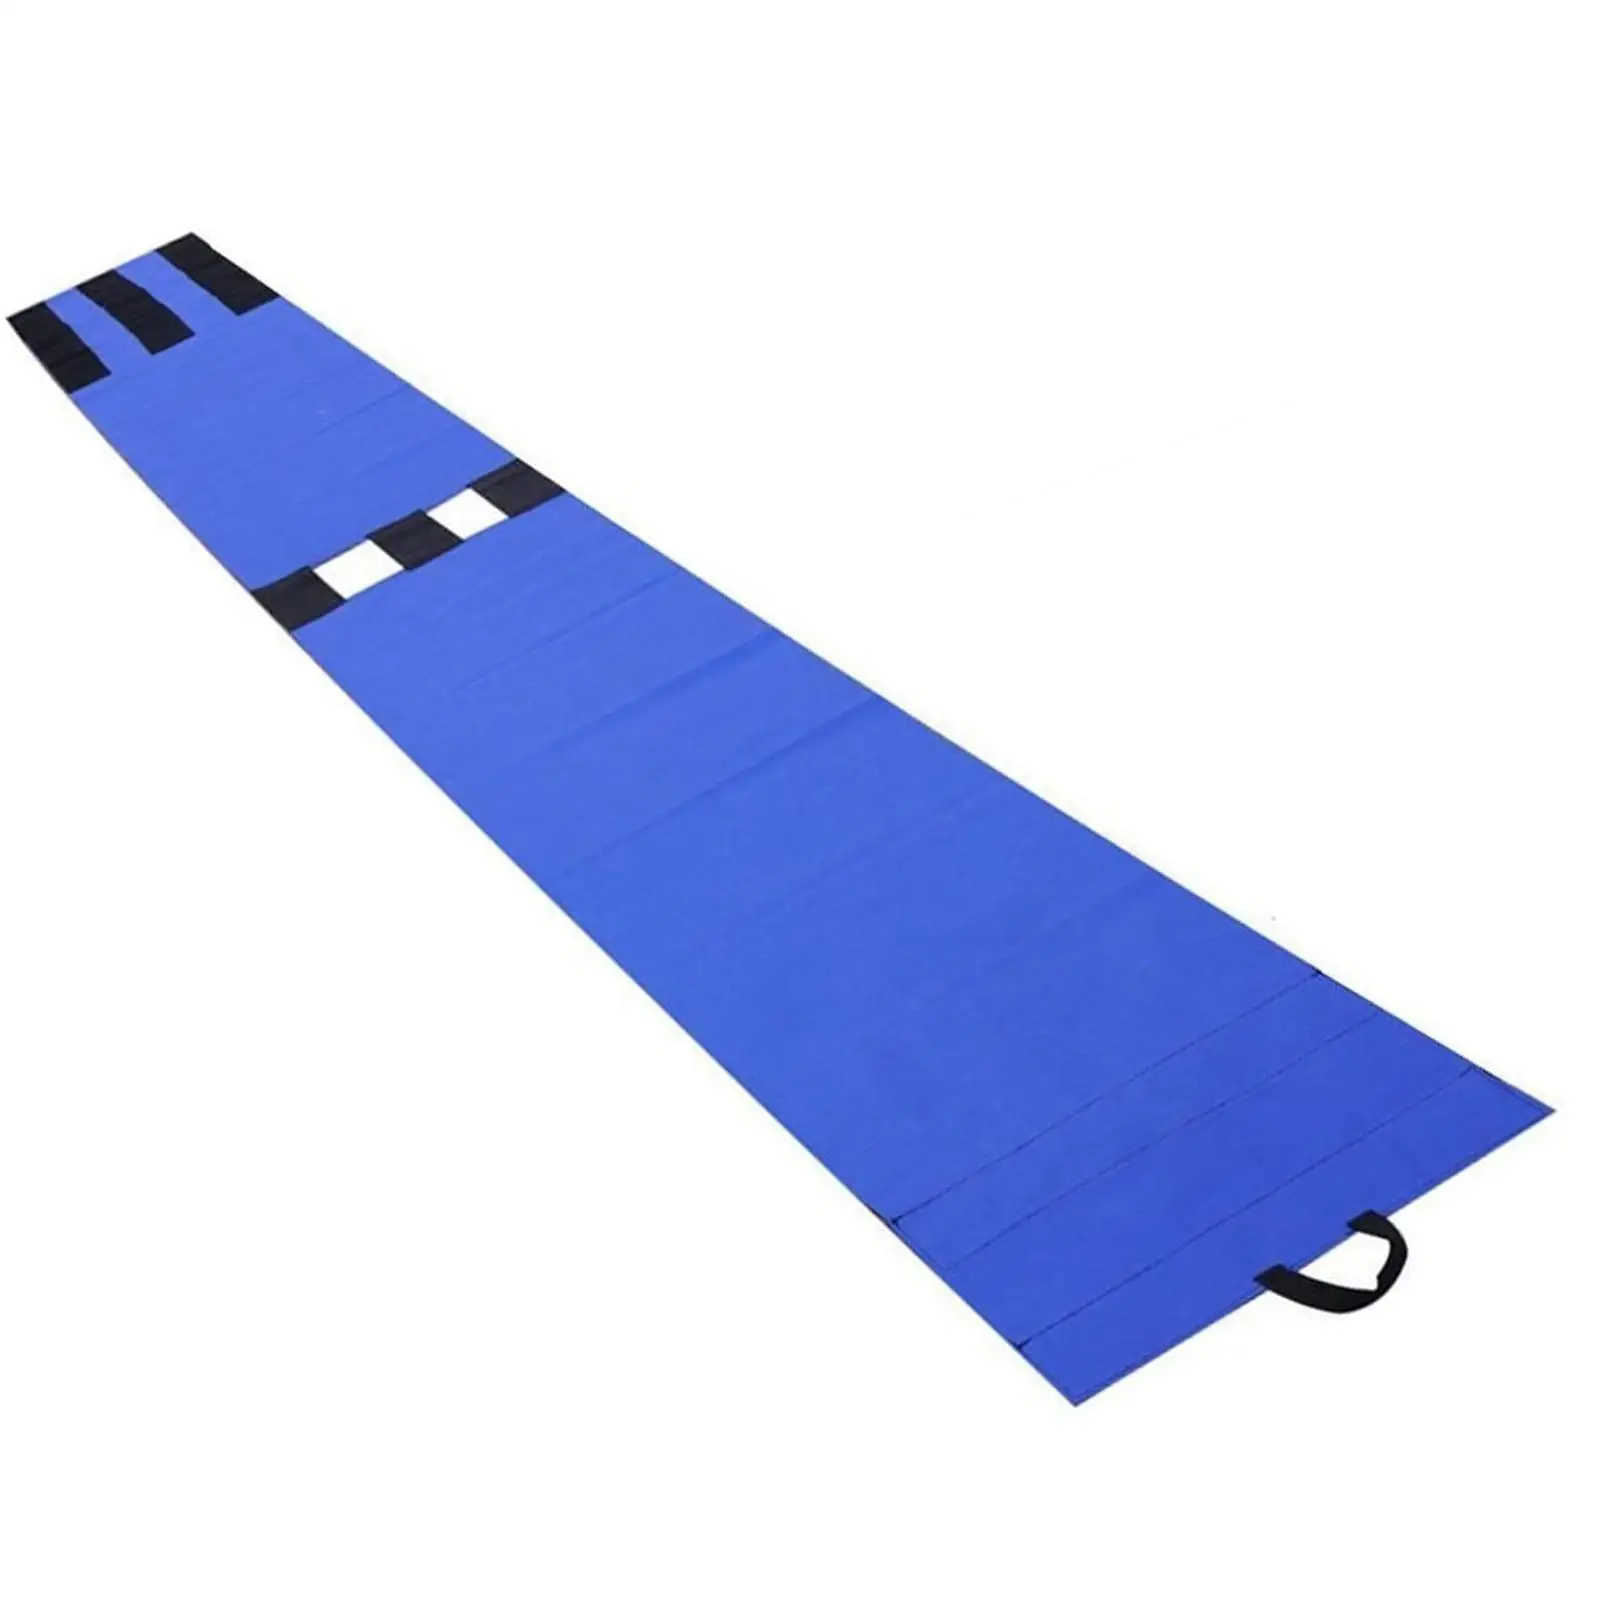 Cargo Binding Belt Convenient Easy to Use Durable for Indoor Home Logistics Company